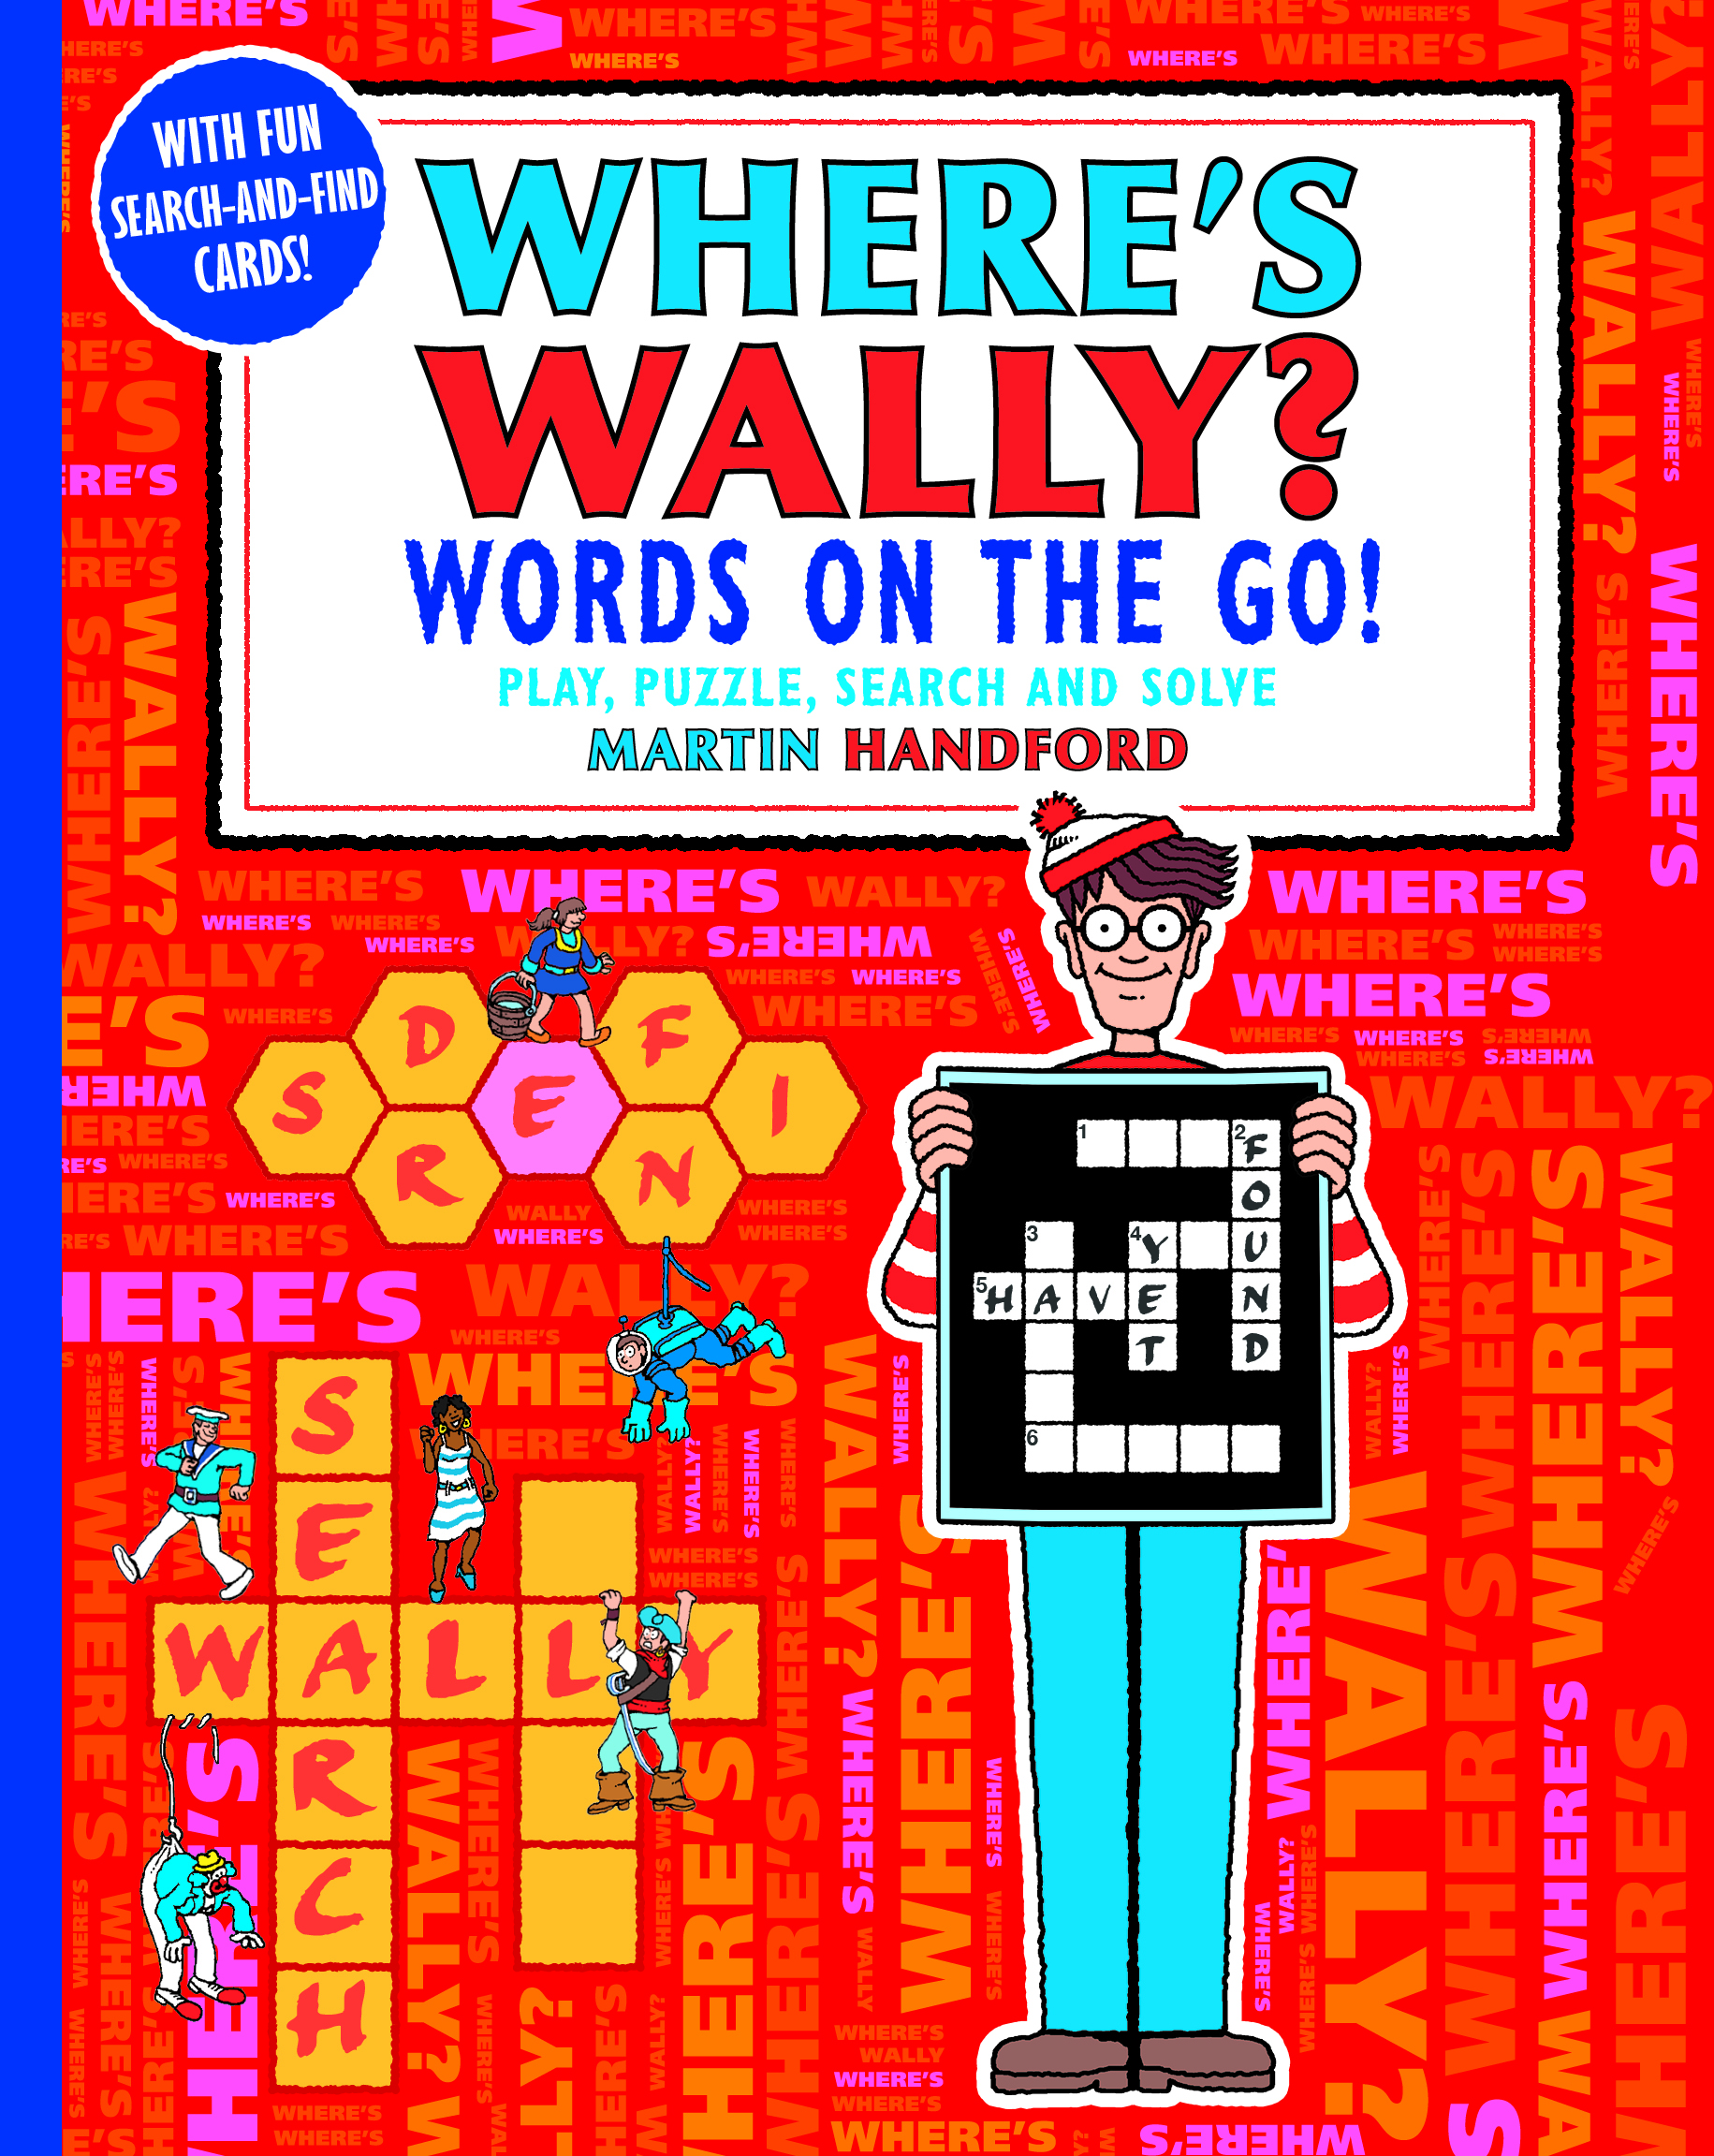 Where-s-Wally-Words-on-the-Go-Play-Puzzle-Search-and-Solve